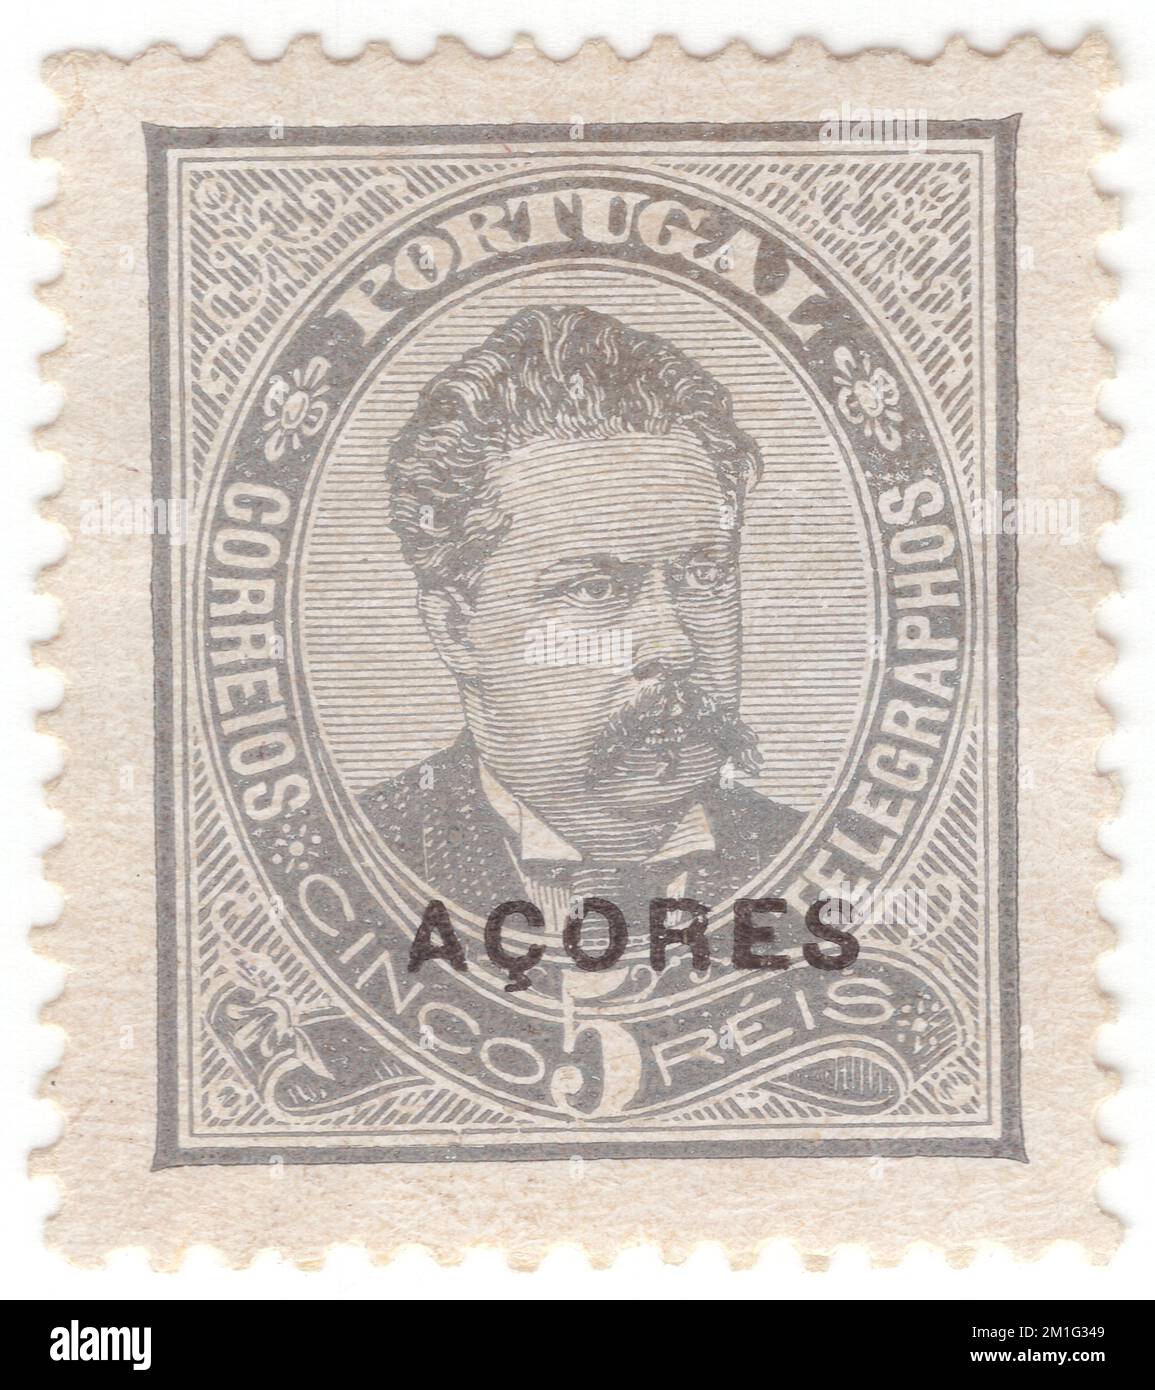 AZORES - 1882: An 5 reis slate postage stamp depicting portrait of King Luiz (Dom Luís I). Stamps of Portugal overprinted in black 'ACORES'. Dom Luís I (31 October 1838, in Lisbon – 19 October 1889, in Cascais), known as The Popular was a member of the ruling House of Braganza, and King of Portugal from 1861 to 1889. The second son of Queen Maria II and her consort, King Ferdinand, he acceded to the throne upon the death of his elder brother King Pedro V. Luís was a cultured man who wrote vernacular poetry, but had no distinguishing gifts in the politics Stock Photo